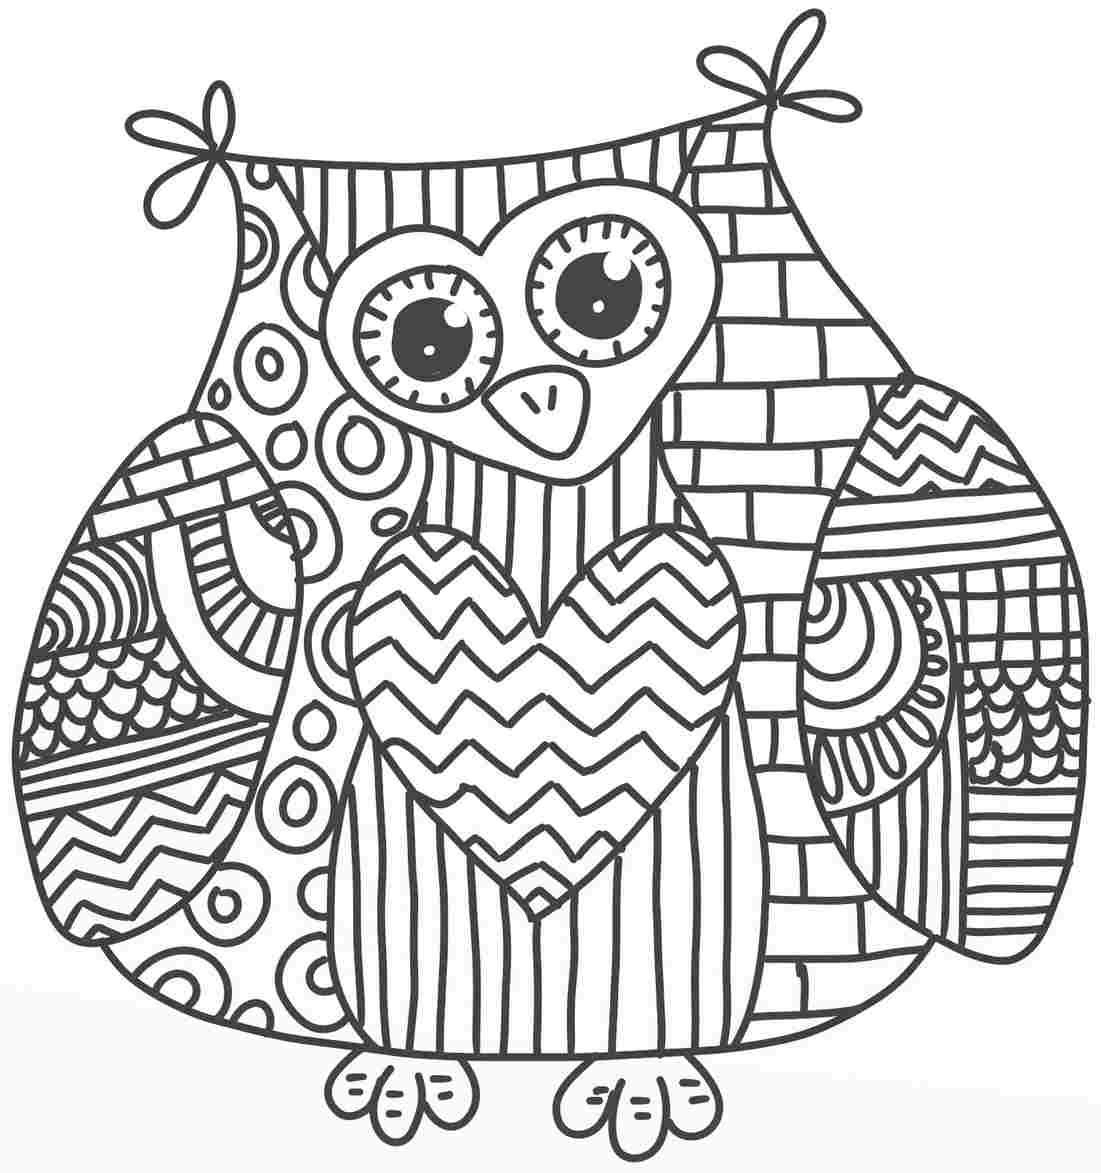 Pdf Coloring Pages For Adults Beautiful Adult Coloring Pages - Free Printable Coloring Pages For Adults Pdf